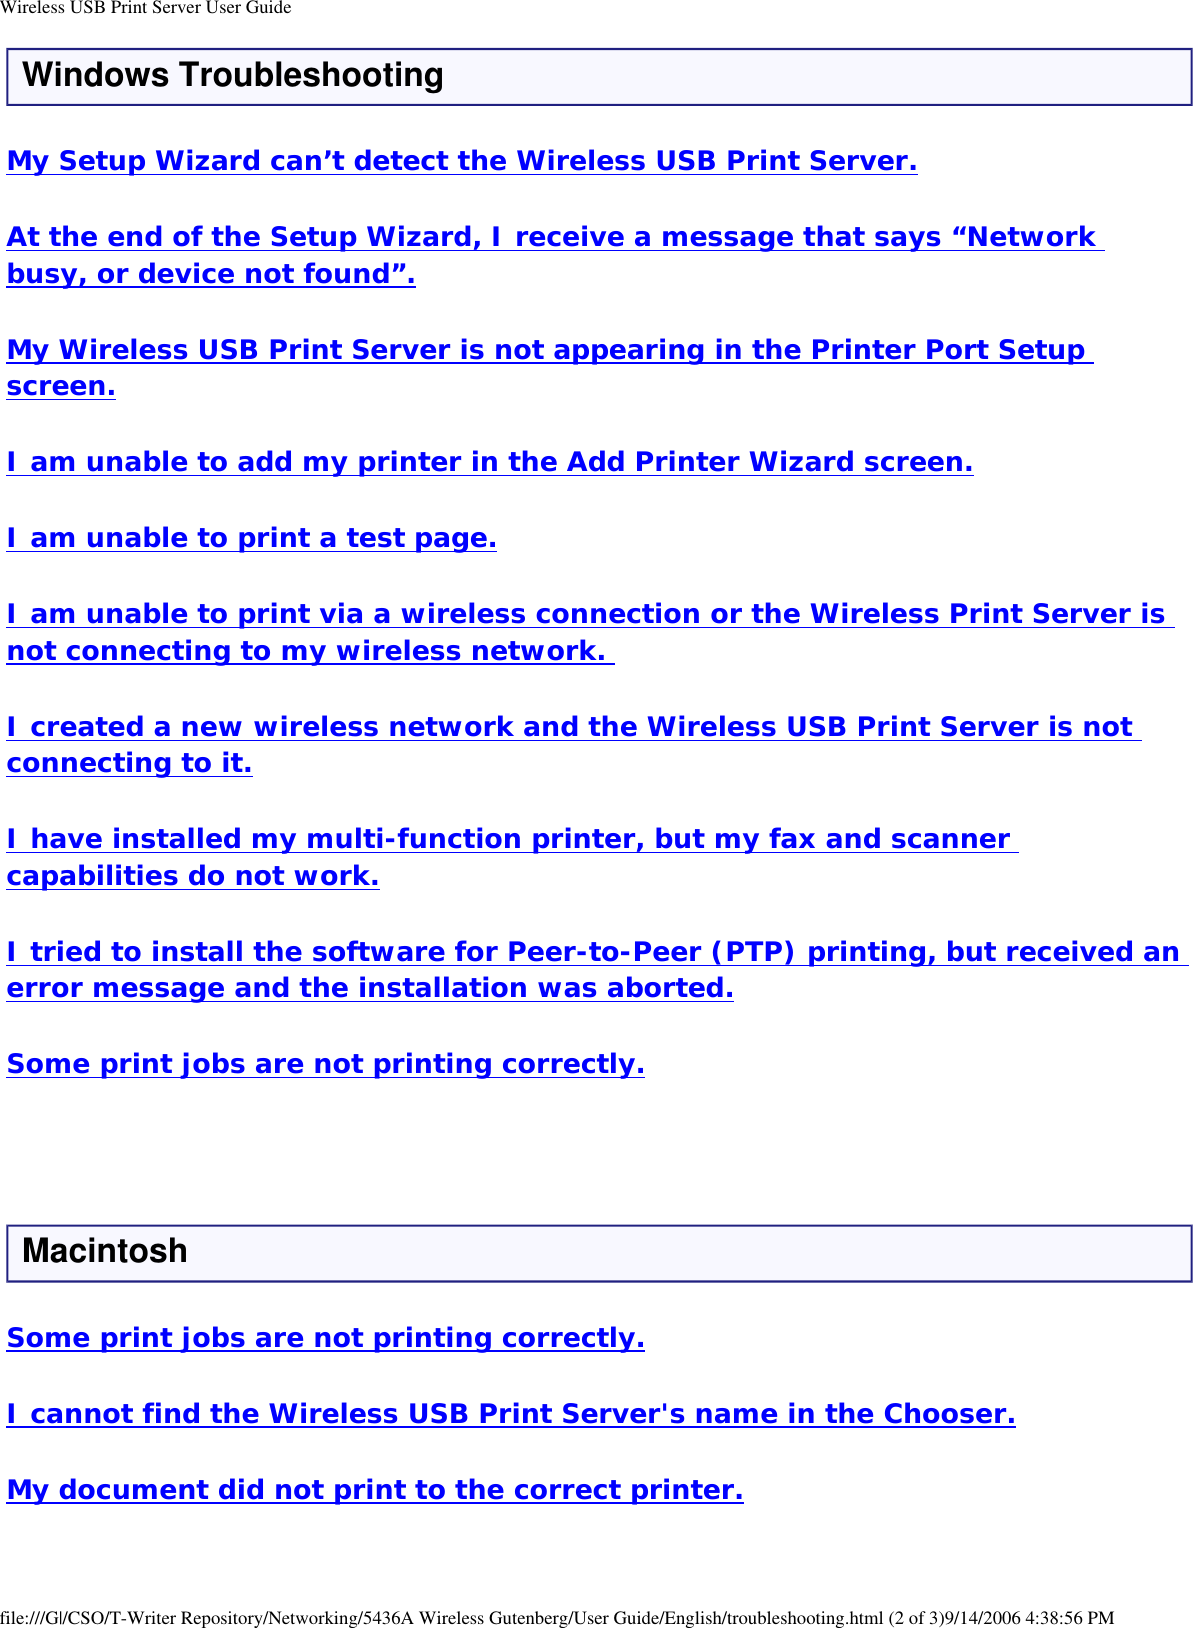 Wireless USB Print Server User GuideWindows TroubleshootingMy Setup Wizard can’t detect the Wireless USB Print Server.At the end of the Setup Wizard, I receive a message that says “Network busy, or device not found”.My Wireless USB Print Server is not appearing in the Printer Port Setup screen.I am unable to add my printer in the Add Printer Wizard screen.I am unable to print a test page.I am unable to print via a wireless connection or the Wireless Print Server is not connecting to my wireless network. I created a new wireless network and the Wireless USB Print Server is not connecting to it.I have installed my multi-function printer, but my fax and scanner capabilities do not work.I tried to install the software for Peer-to-Peer (PTP) printing, but received an error message and the installation was aborted.Some print jobs are not printing correctly. MacintoshSome print jobs are not printing correctly.I cannot find the Wireless USB Print Server&apos;s name in the Chooser.My document did not print to the correct printer.file:///G|/CSO/T-Writer Repository/Networking/5436A Wireless Gutenberg/User Guide/English/troubleshooting.html (2 of 3)9/14/2006 4:38:56 PM